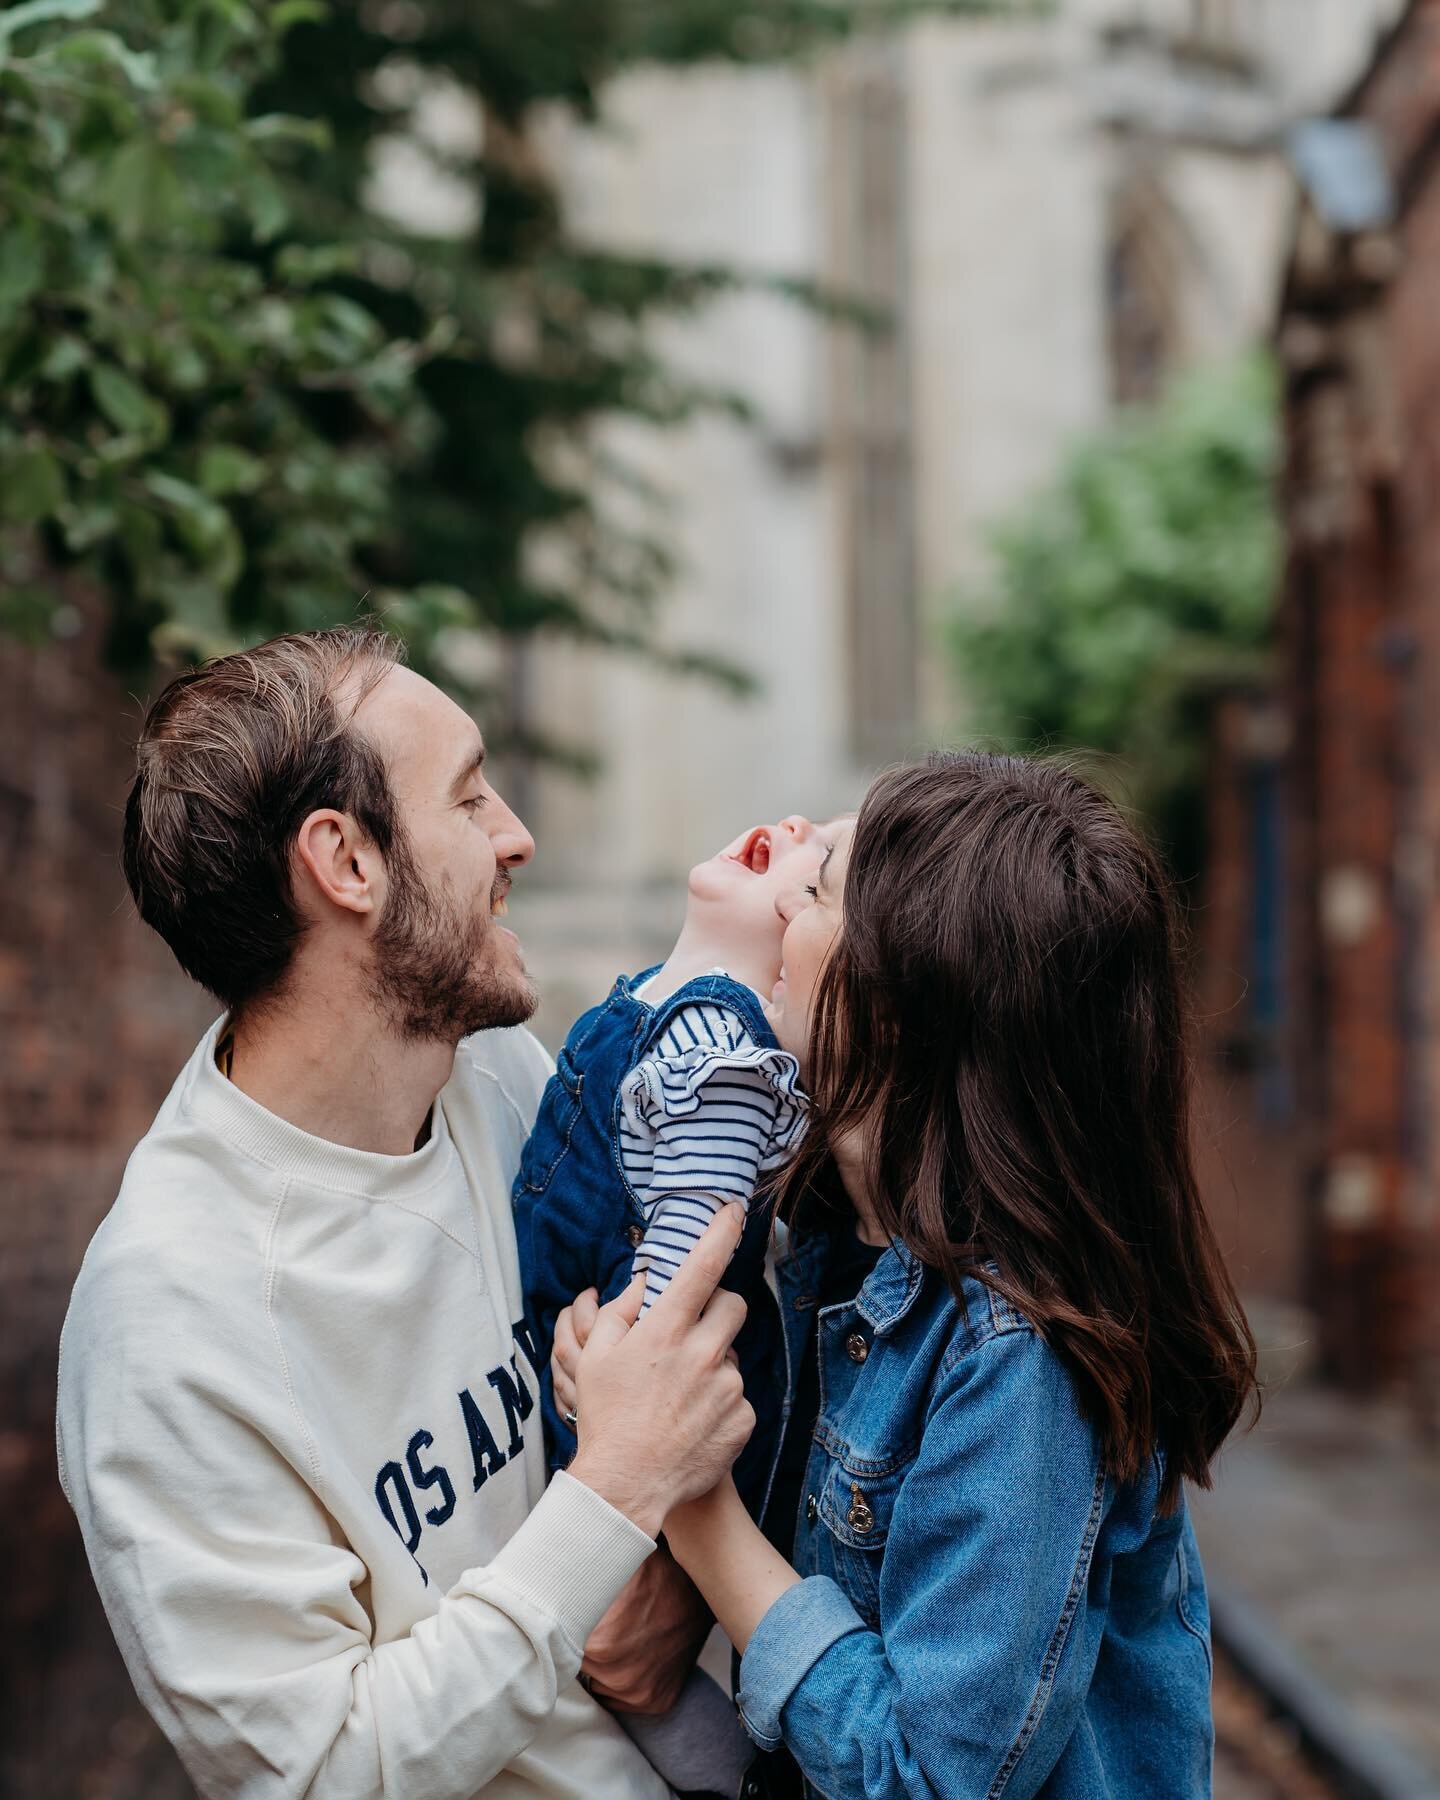 Family shoots 💙

Instagram did me dirty on my reel and deleted the audio. So I am reposting as I can&rsquo;t let these photos get deleted from my grid.

We took a walk around town and ended up at Oglesforth (my favourite street in York) 

I loved wo